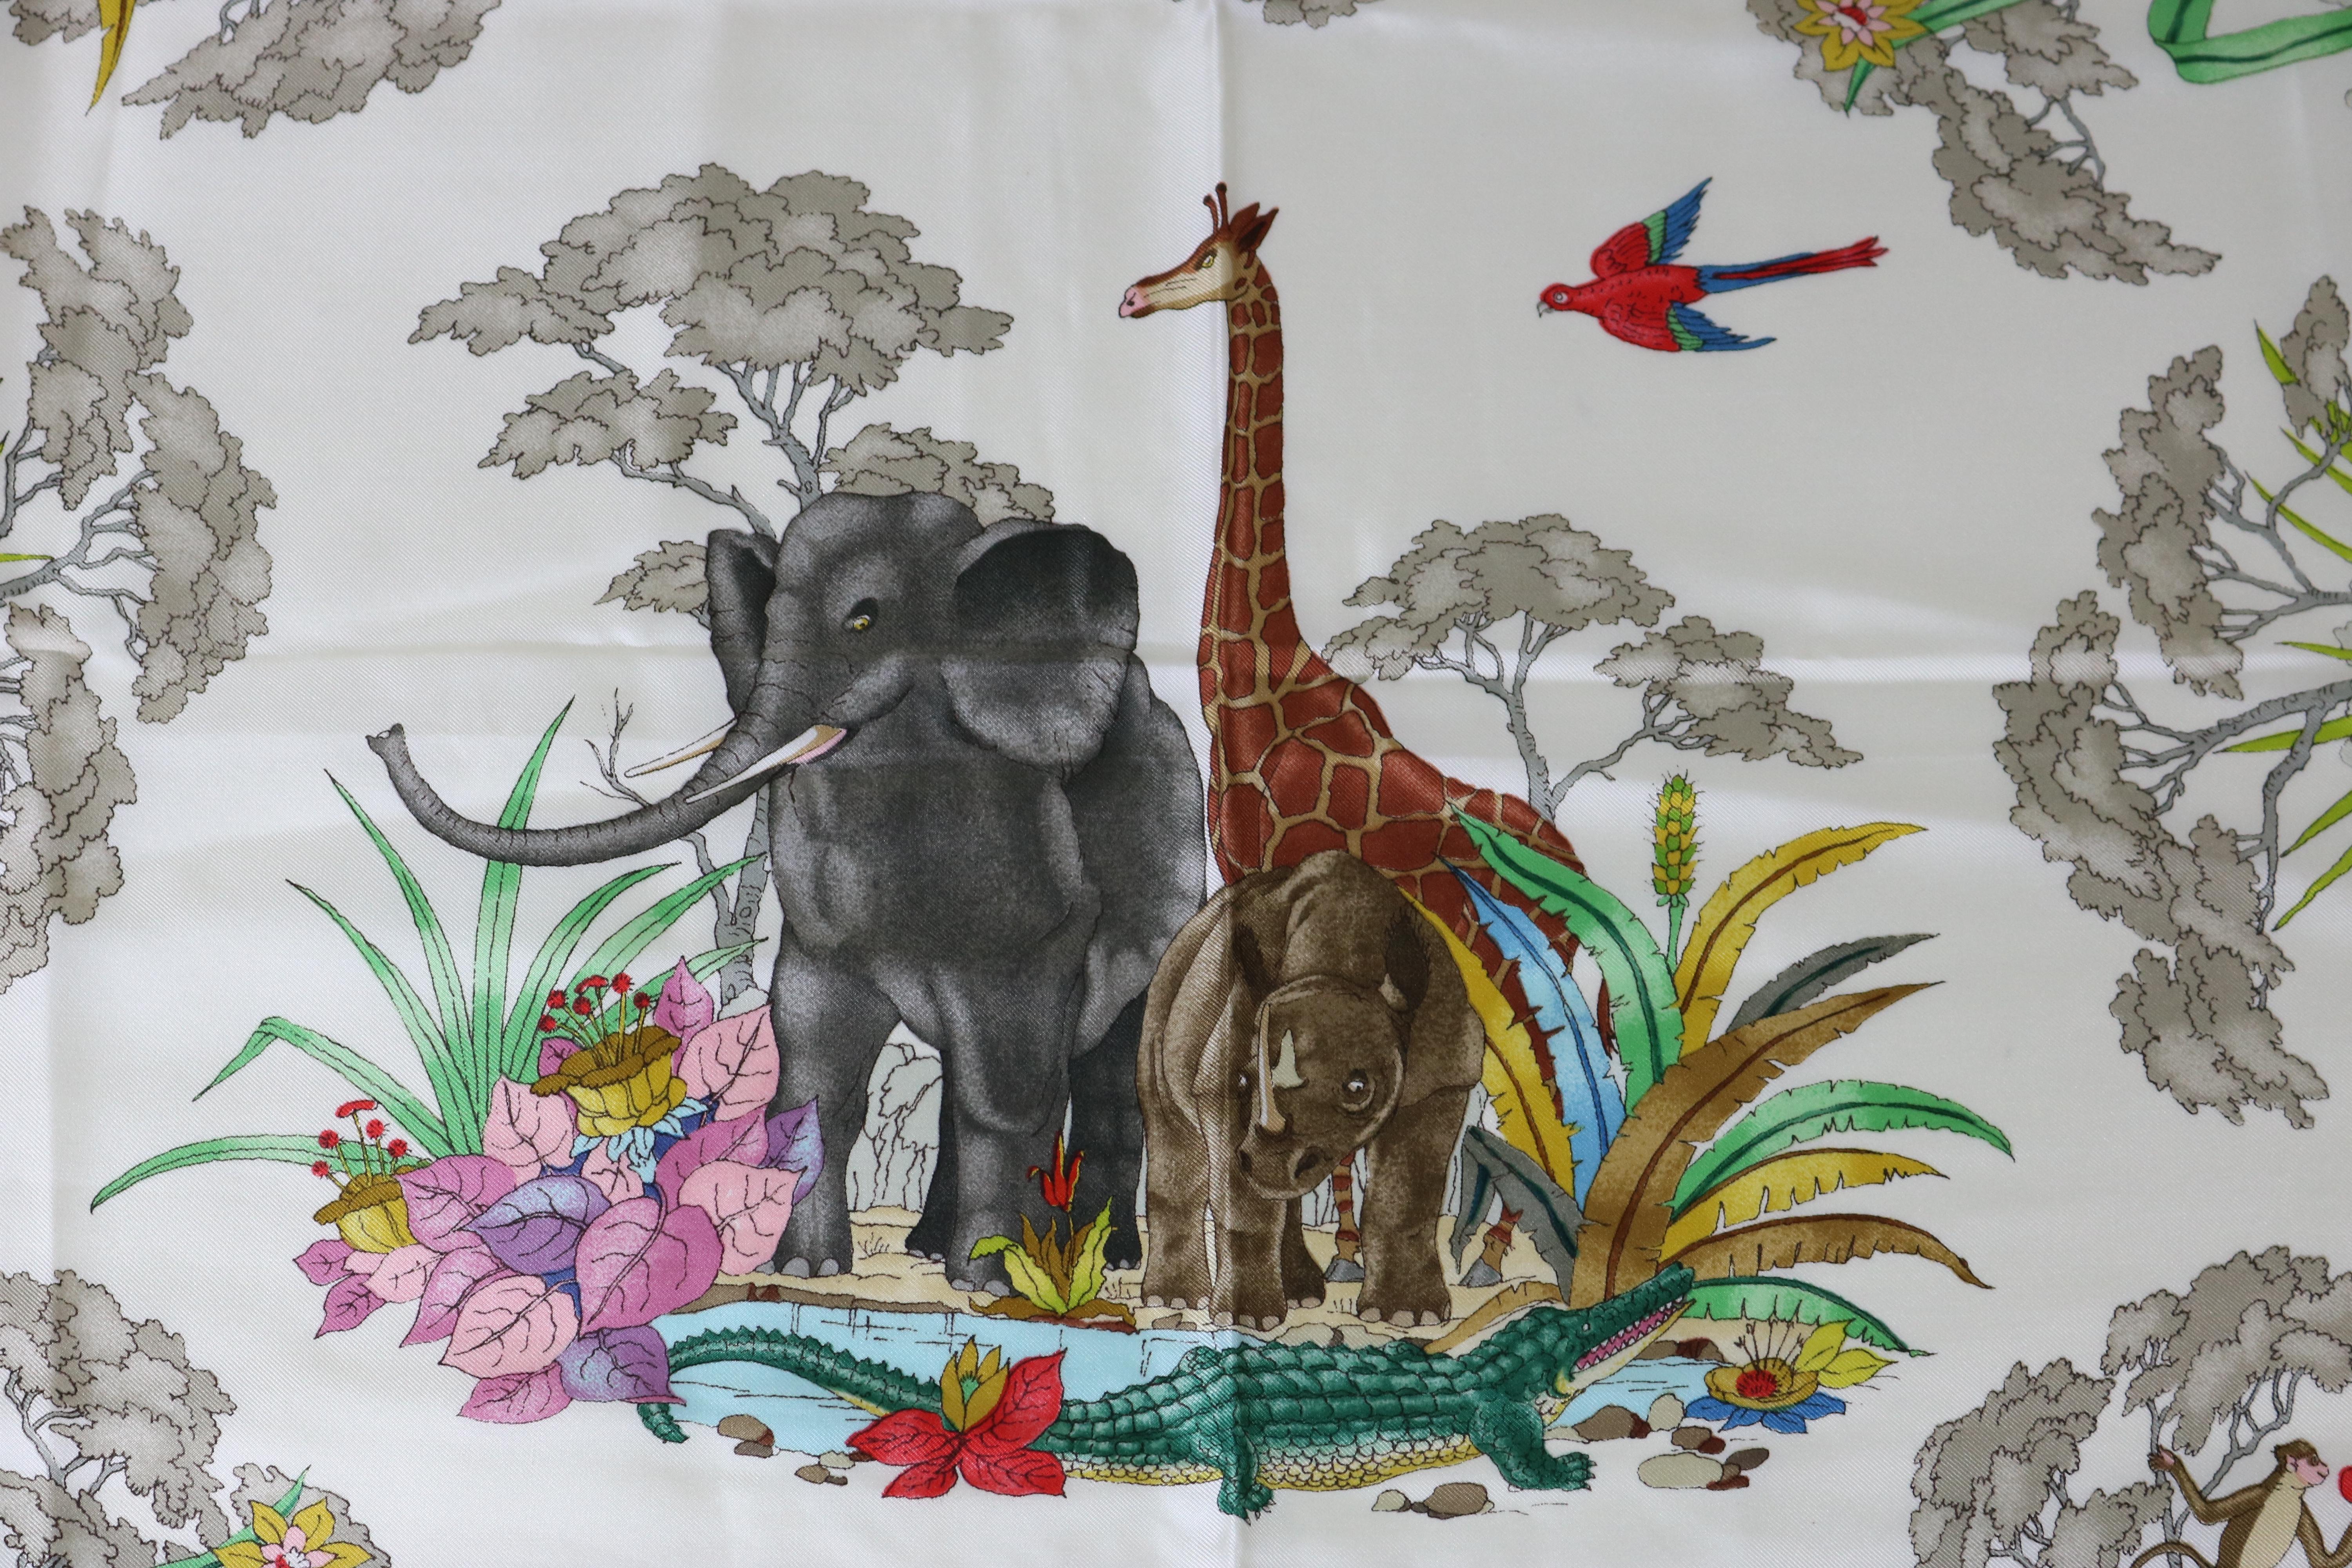 The stunning circa 1970 Gucci scarf is a work of art with beautiful animals by the artist Vittorio Accornero in today's on trend colors!
Vittorio Accornero born at Casale Monferrato (Italy) in 1896, was an accomplished artist and illustrator of